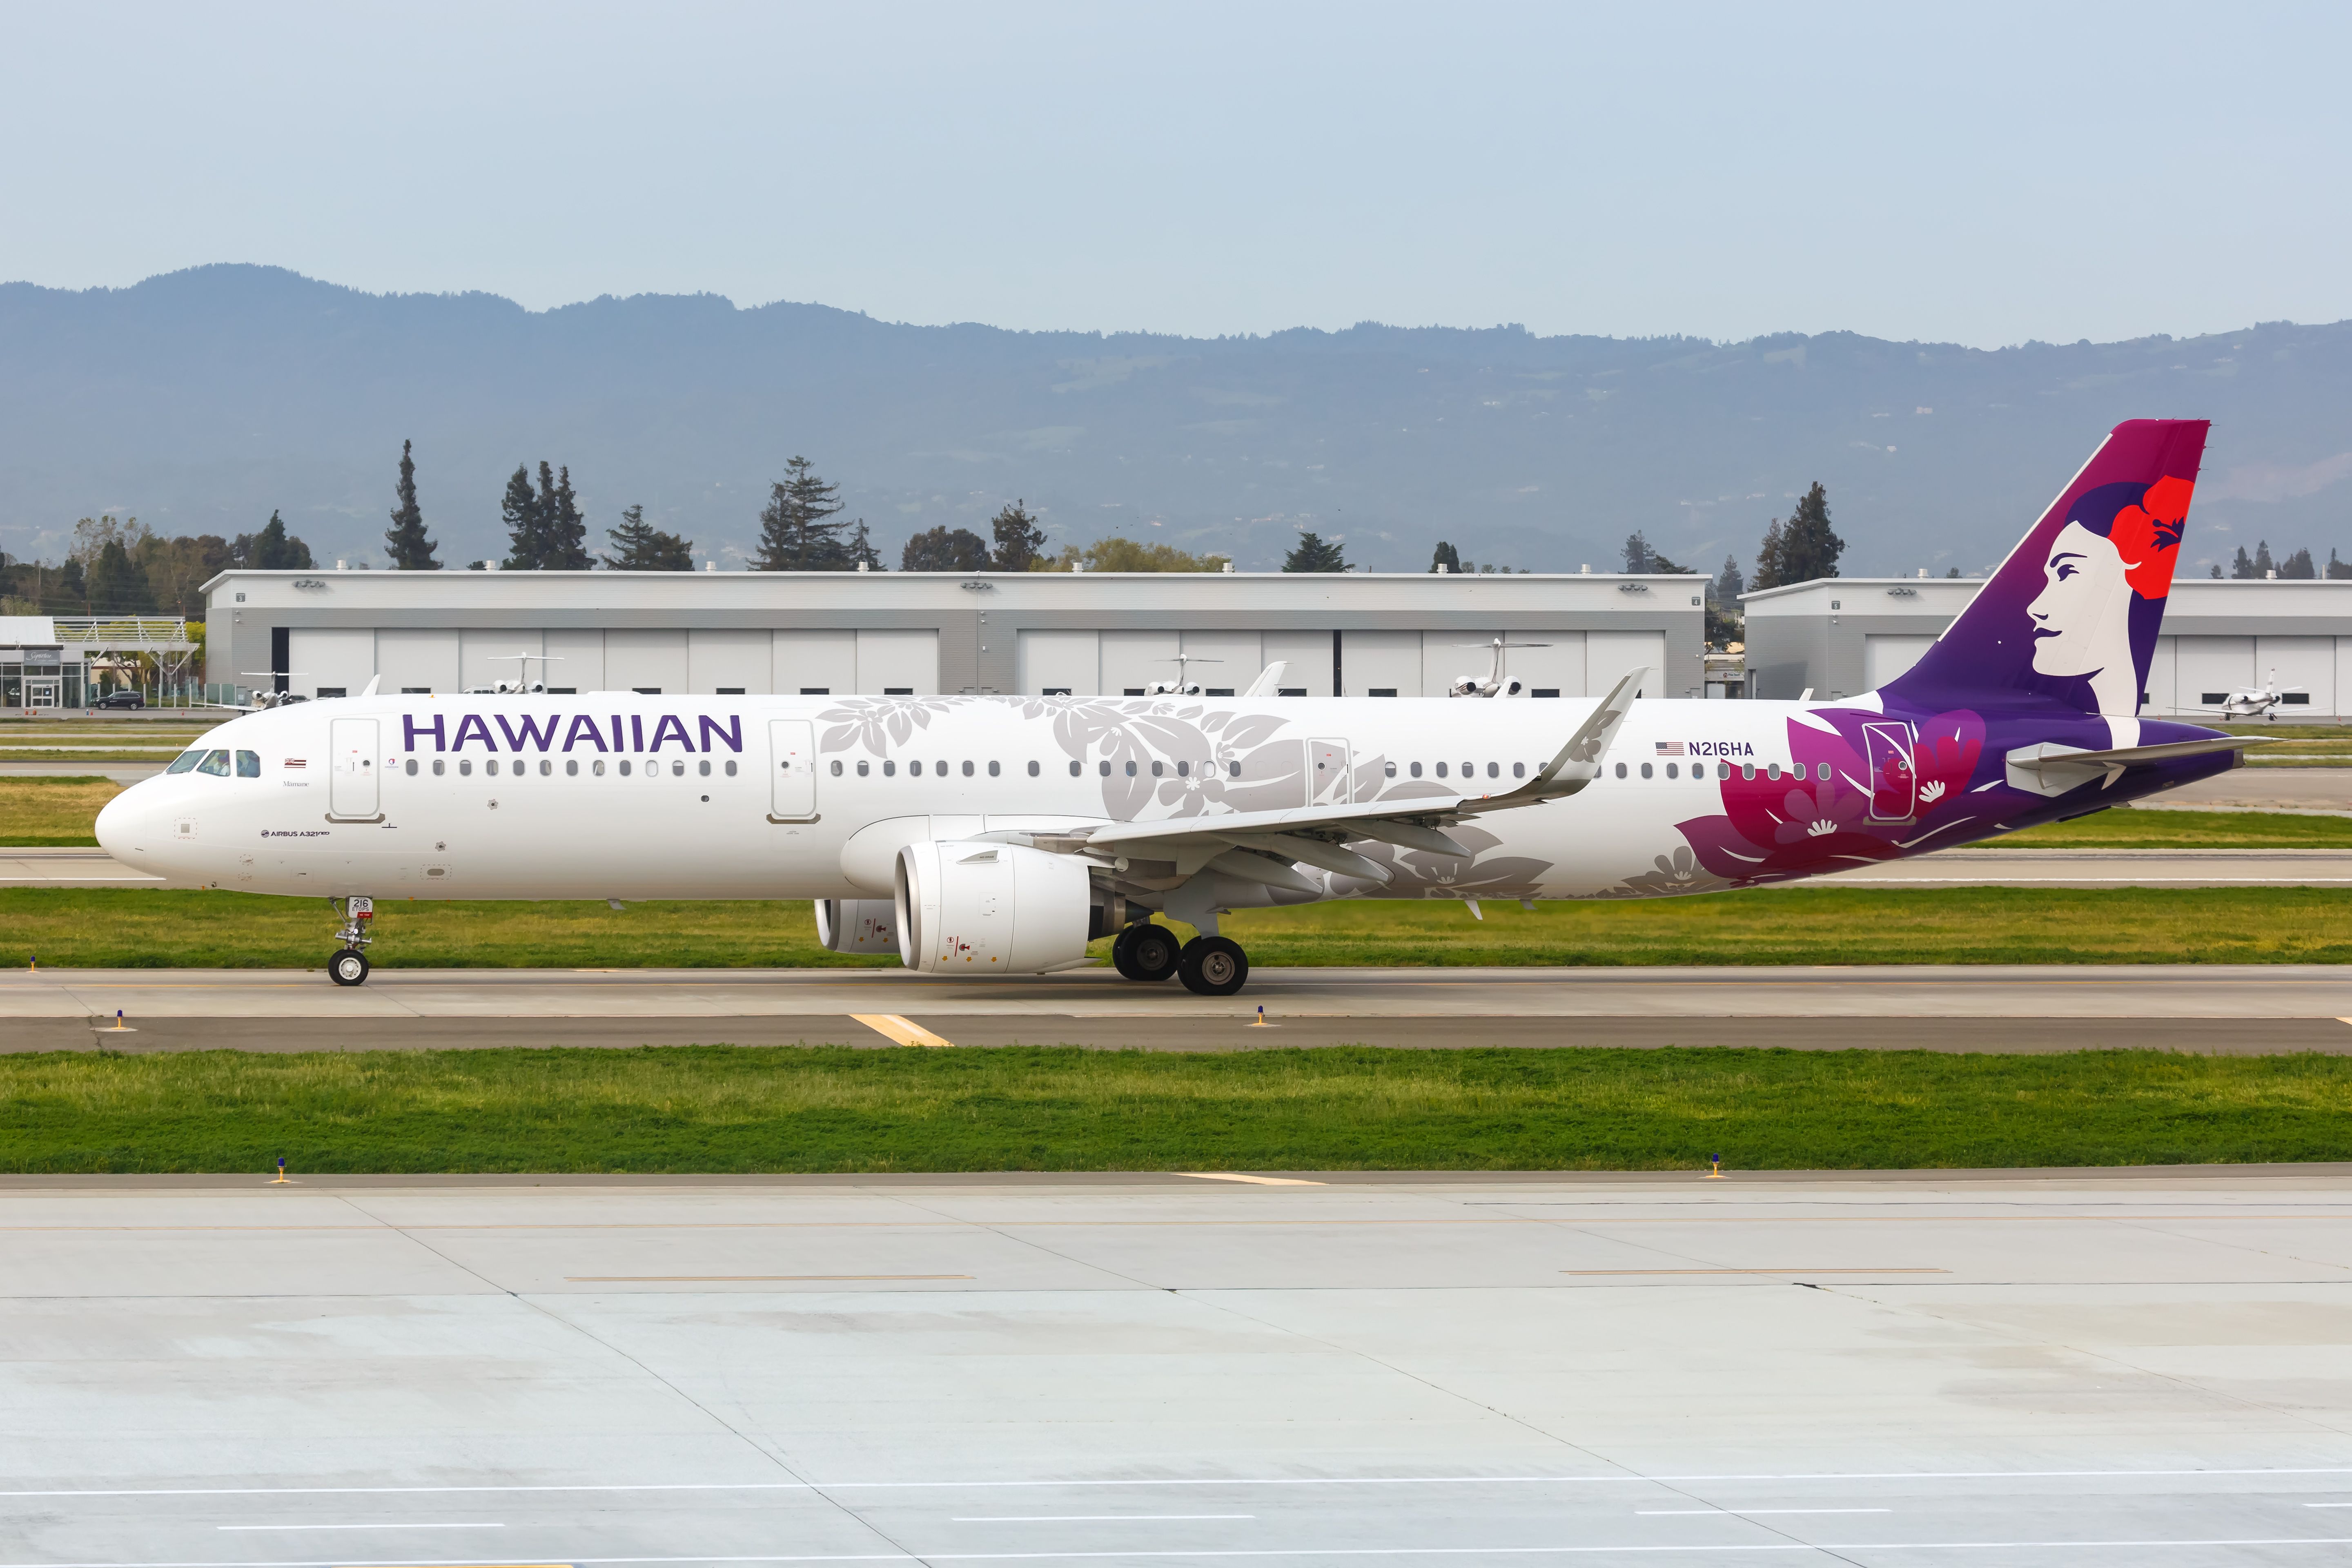 Hawaiian Airlines Airbus A321neo on ground